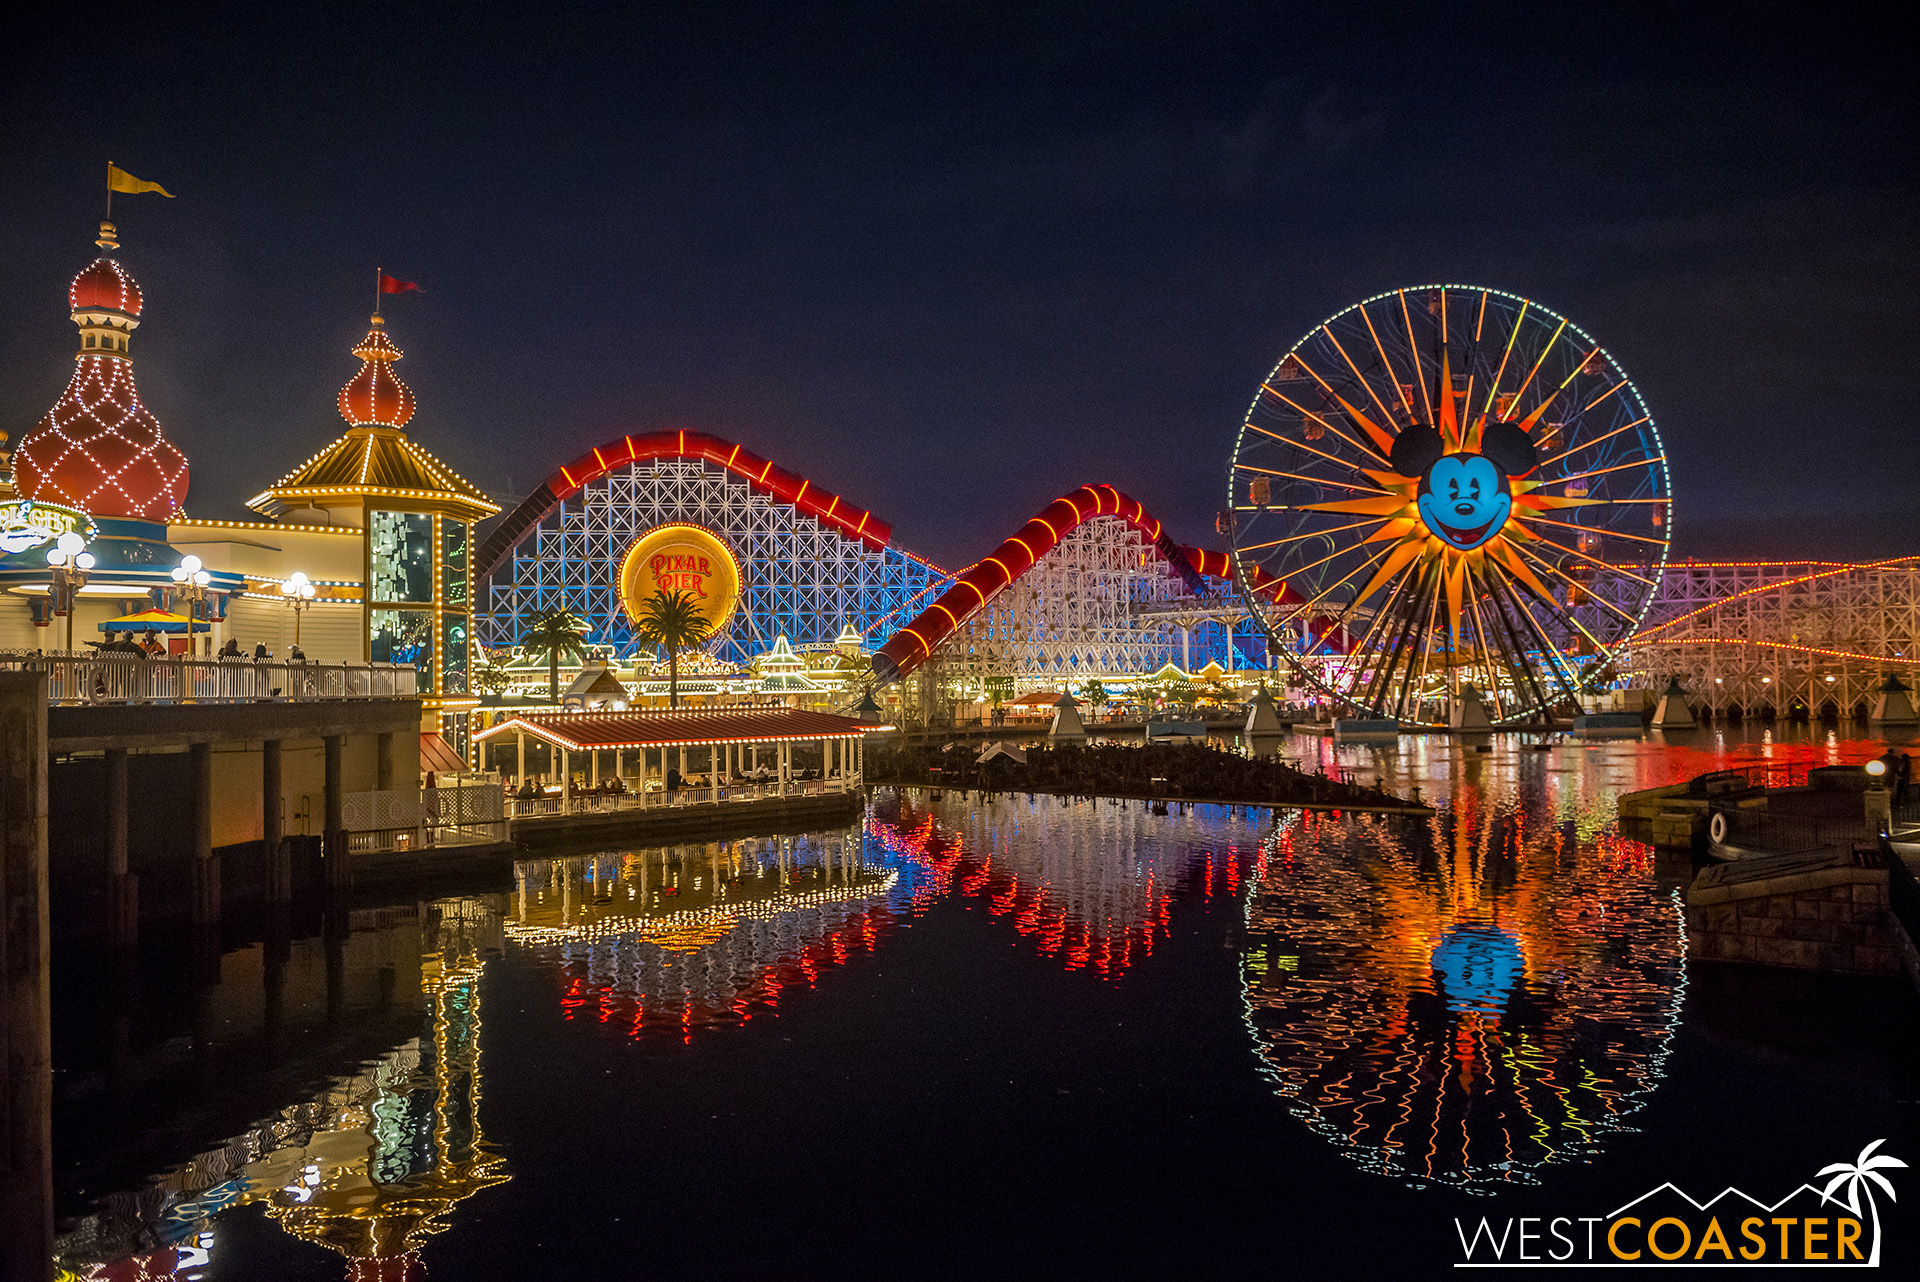  One World of Color platform was up last Friday when I stopped by. 